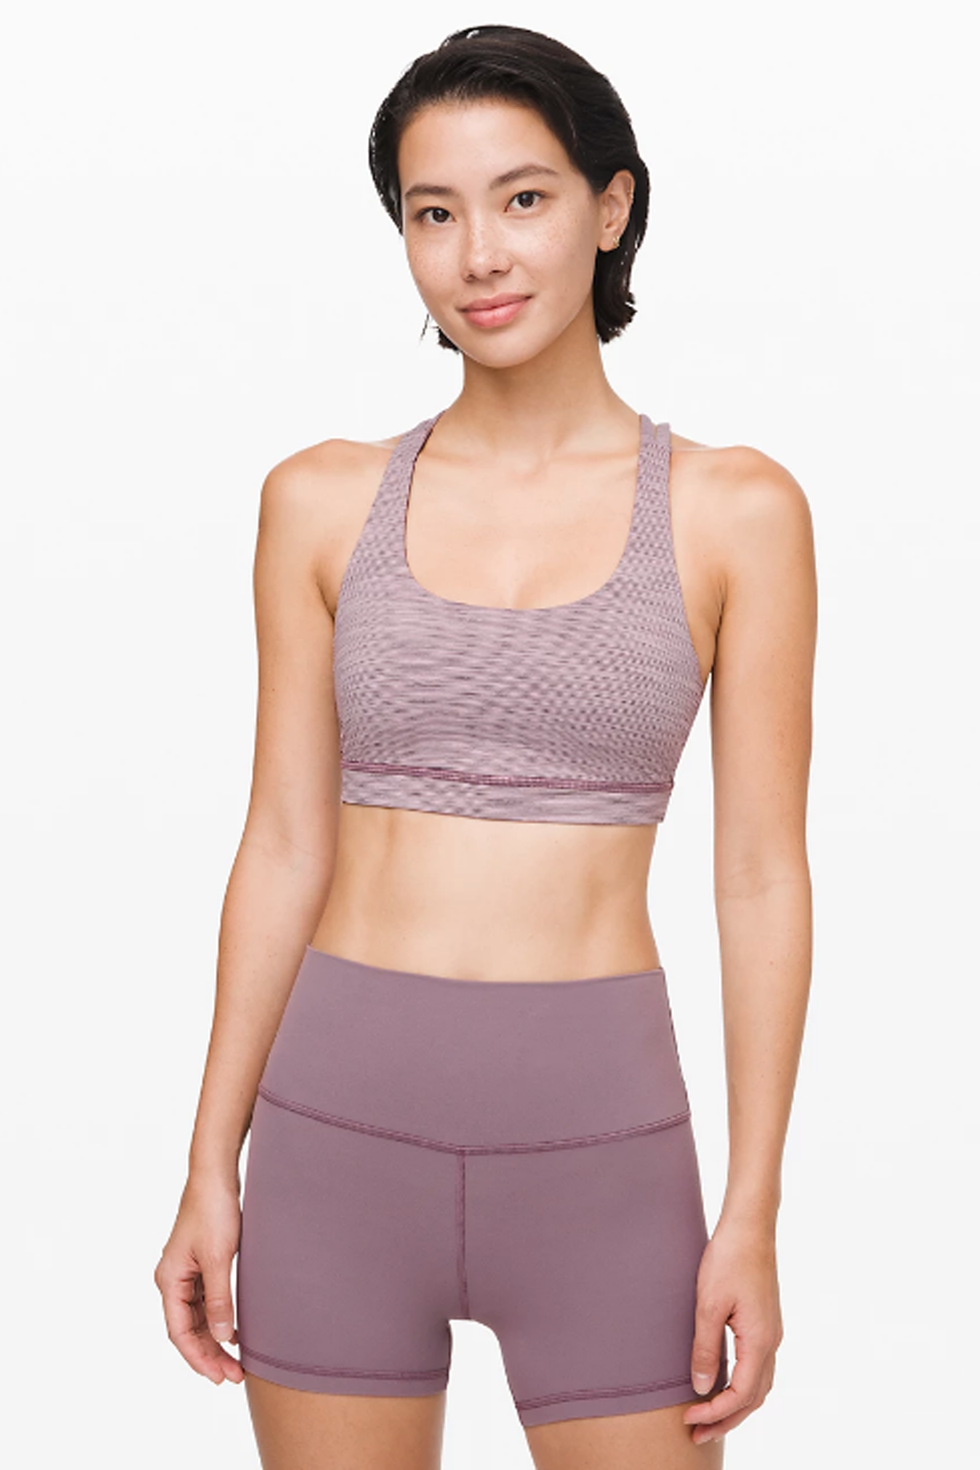 Top 5 Sports Bra Trends To Impress Your Customers in 2022